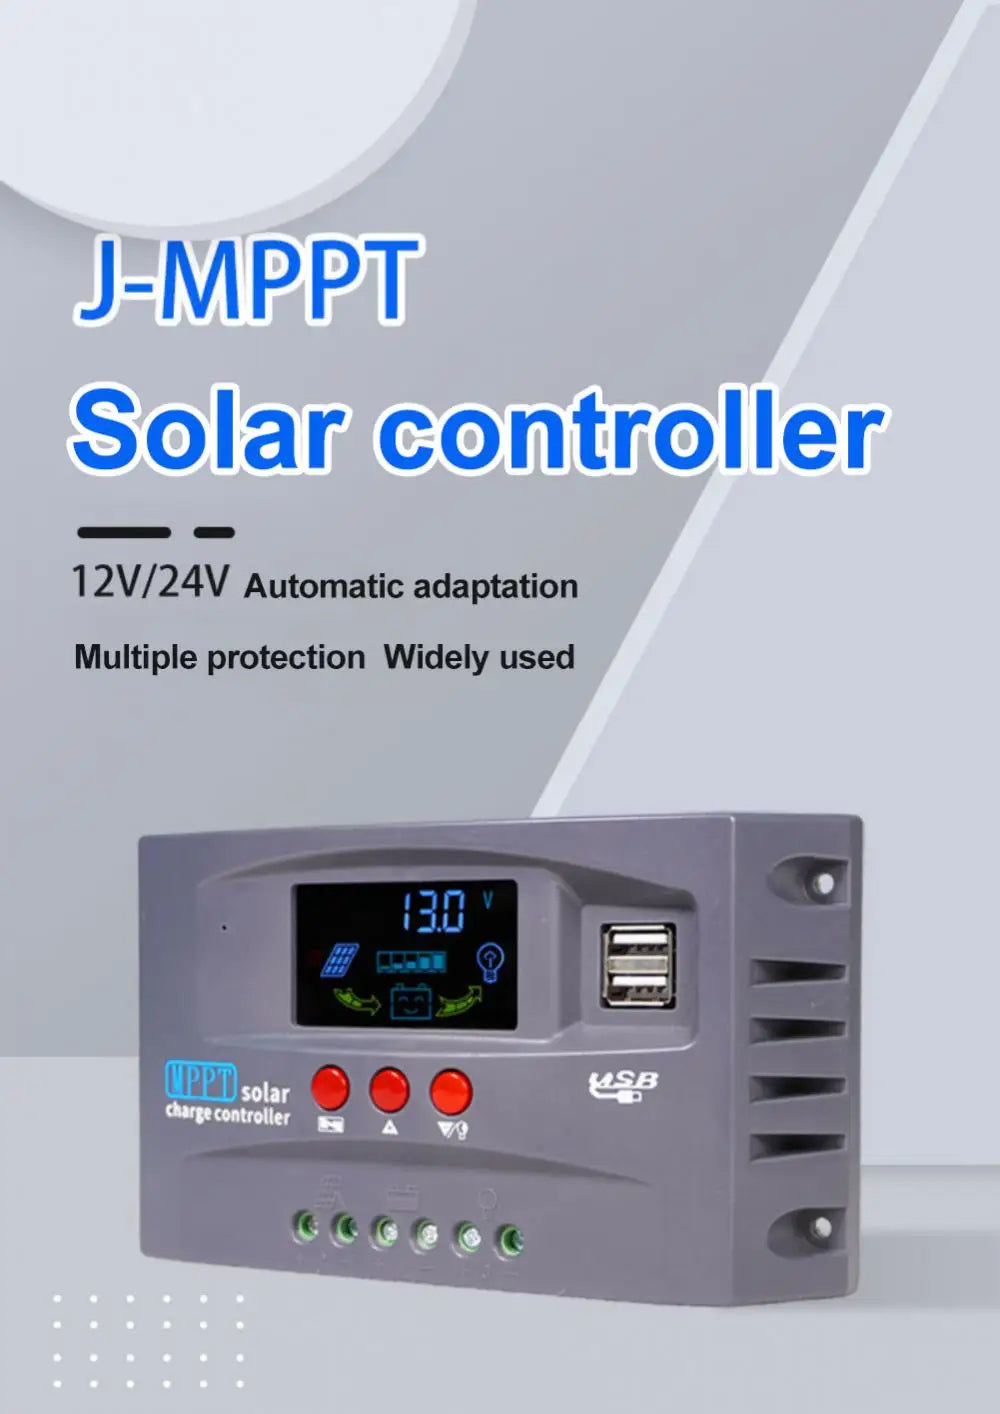 CORUI 10A 20A 30A MPPT Solar Charge Controller, MPPT solar charger controller for 12V or 24V systems with auto-adaptation and multi-protections.